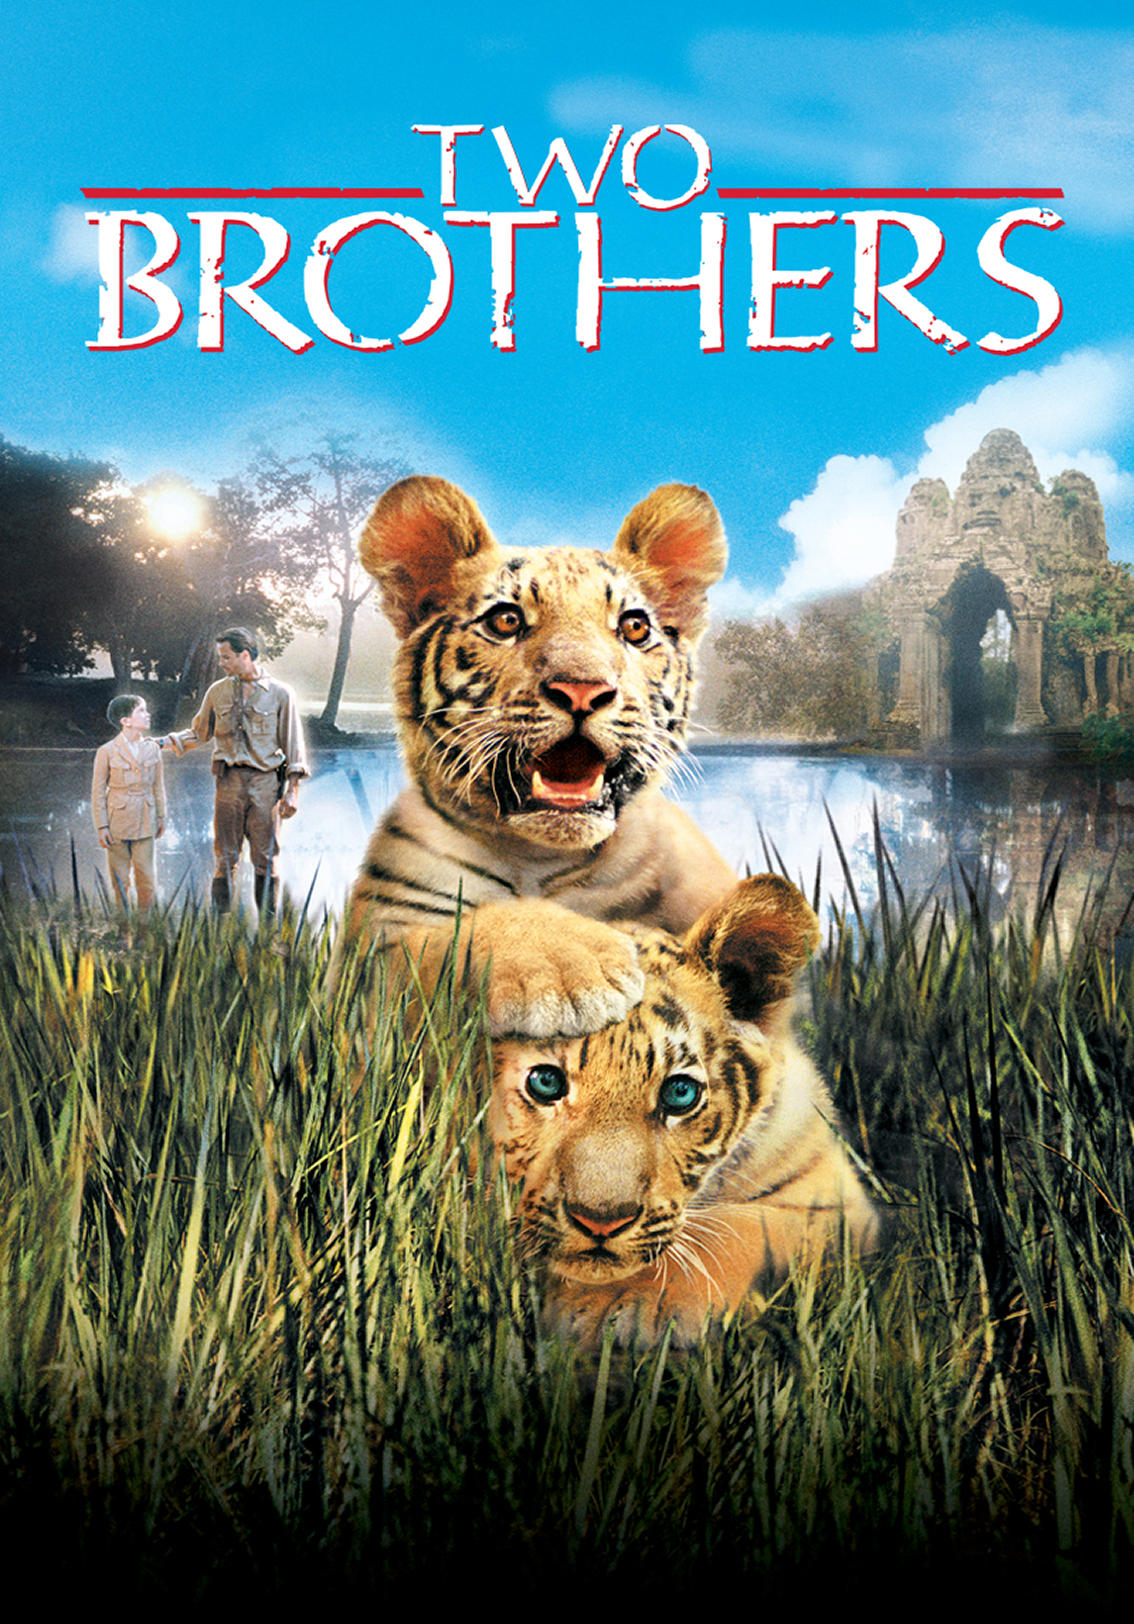 tale of two brothers game download free